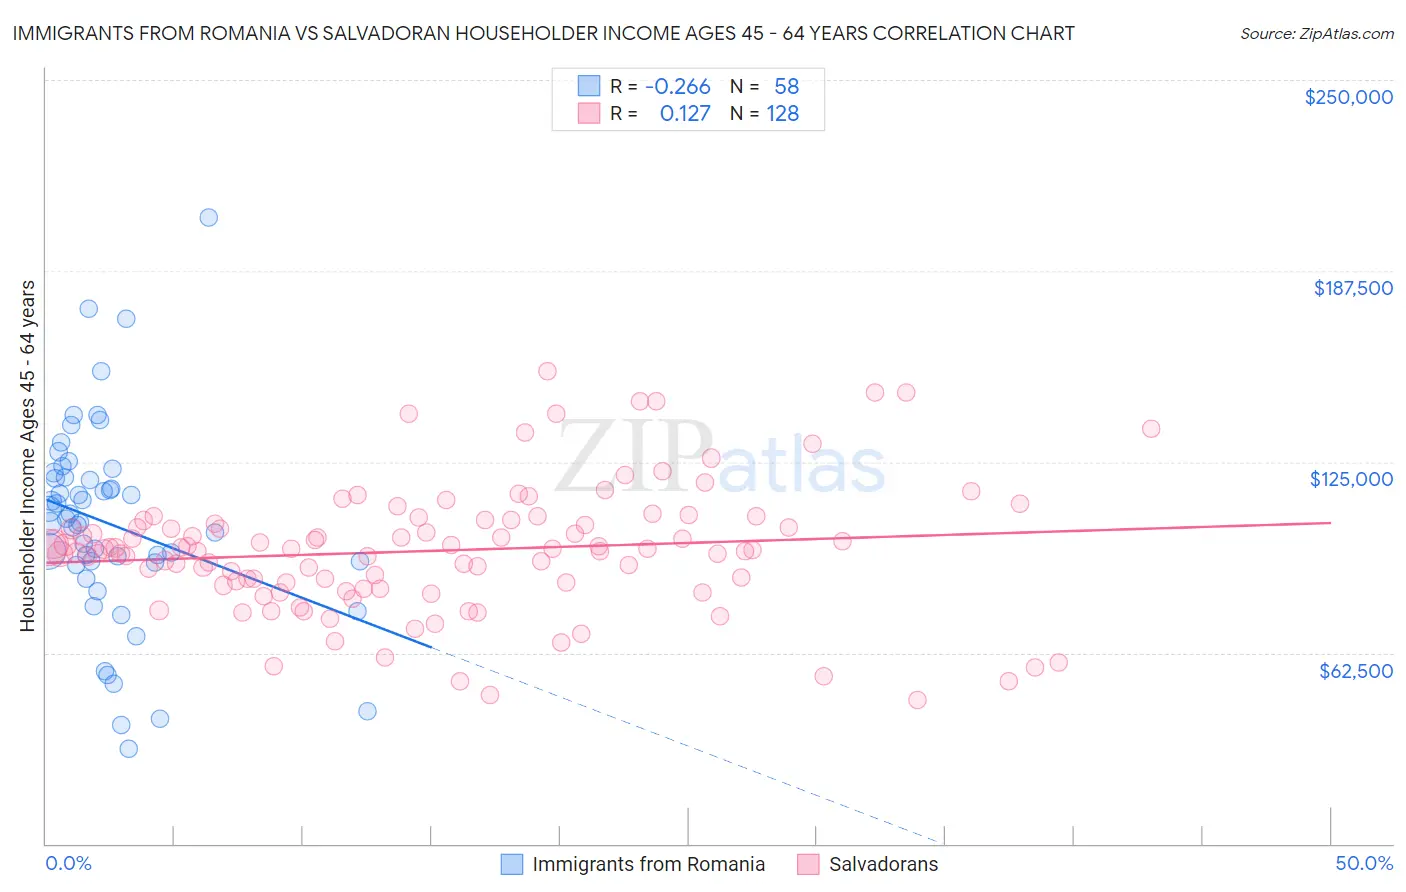 Immigrants from Romania vs Salvadoran Householder Income Ages 45 - 64 years